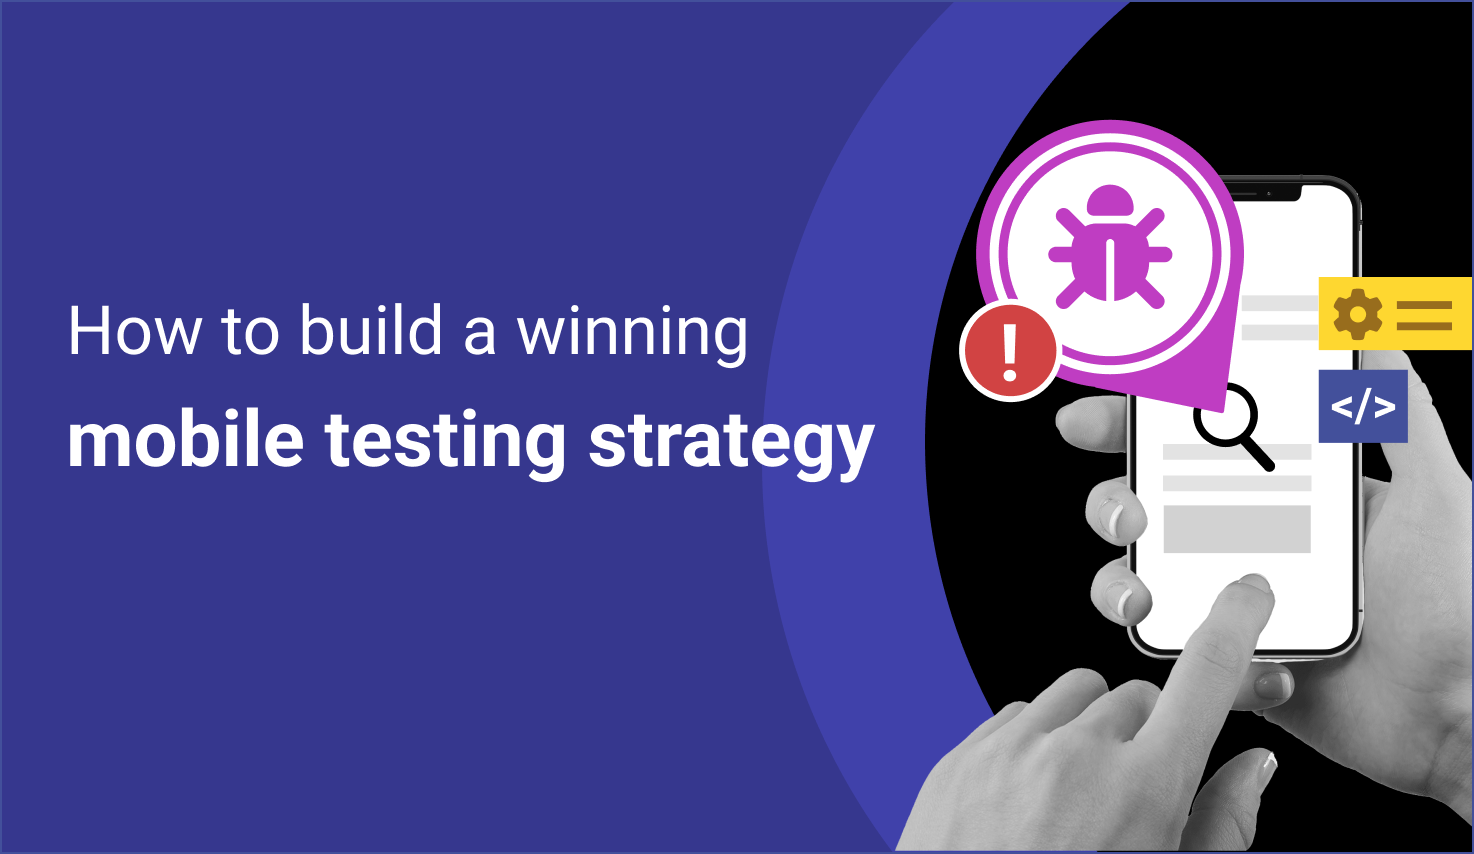 How to build a winning mobile testing strategy